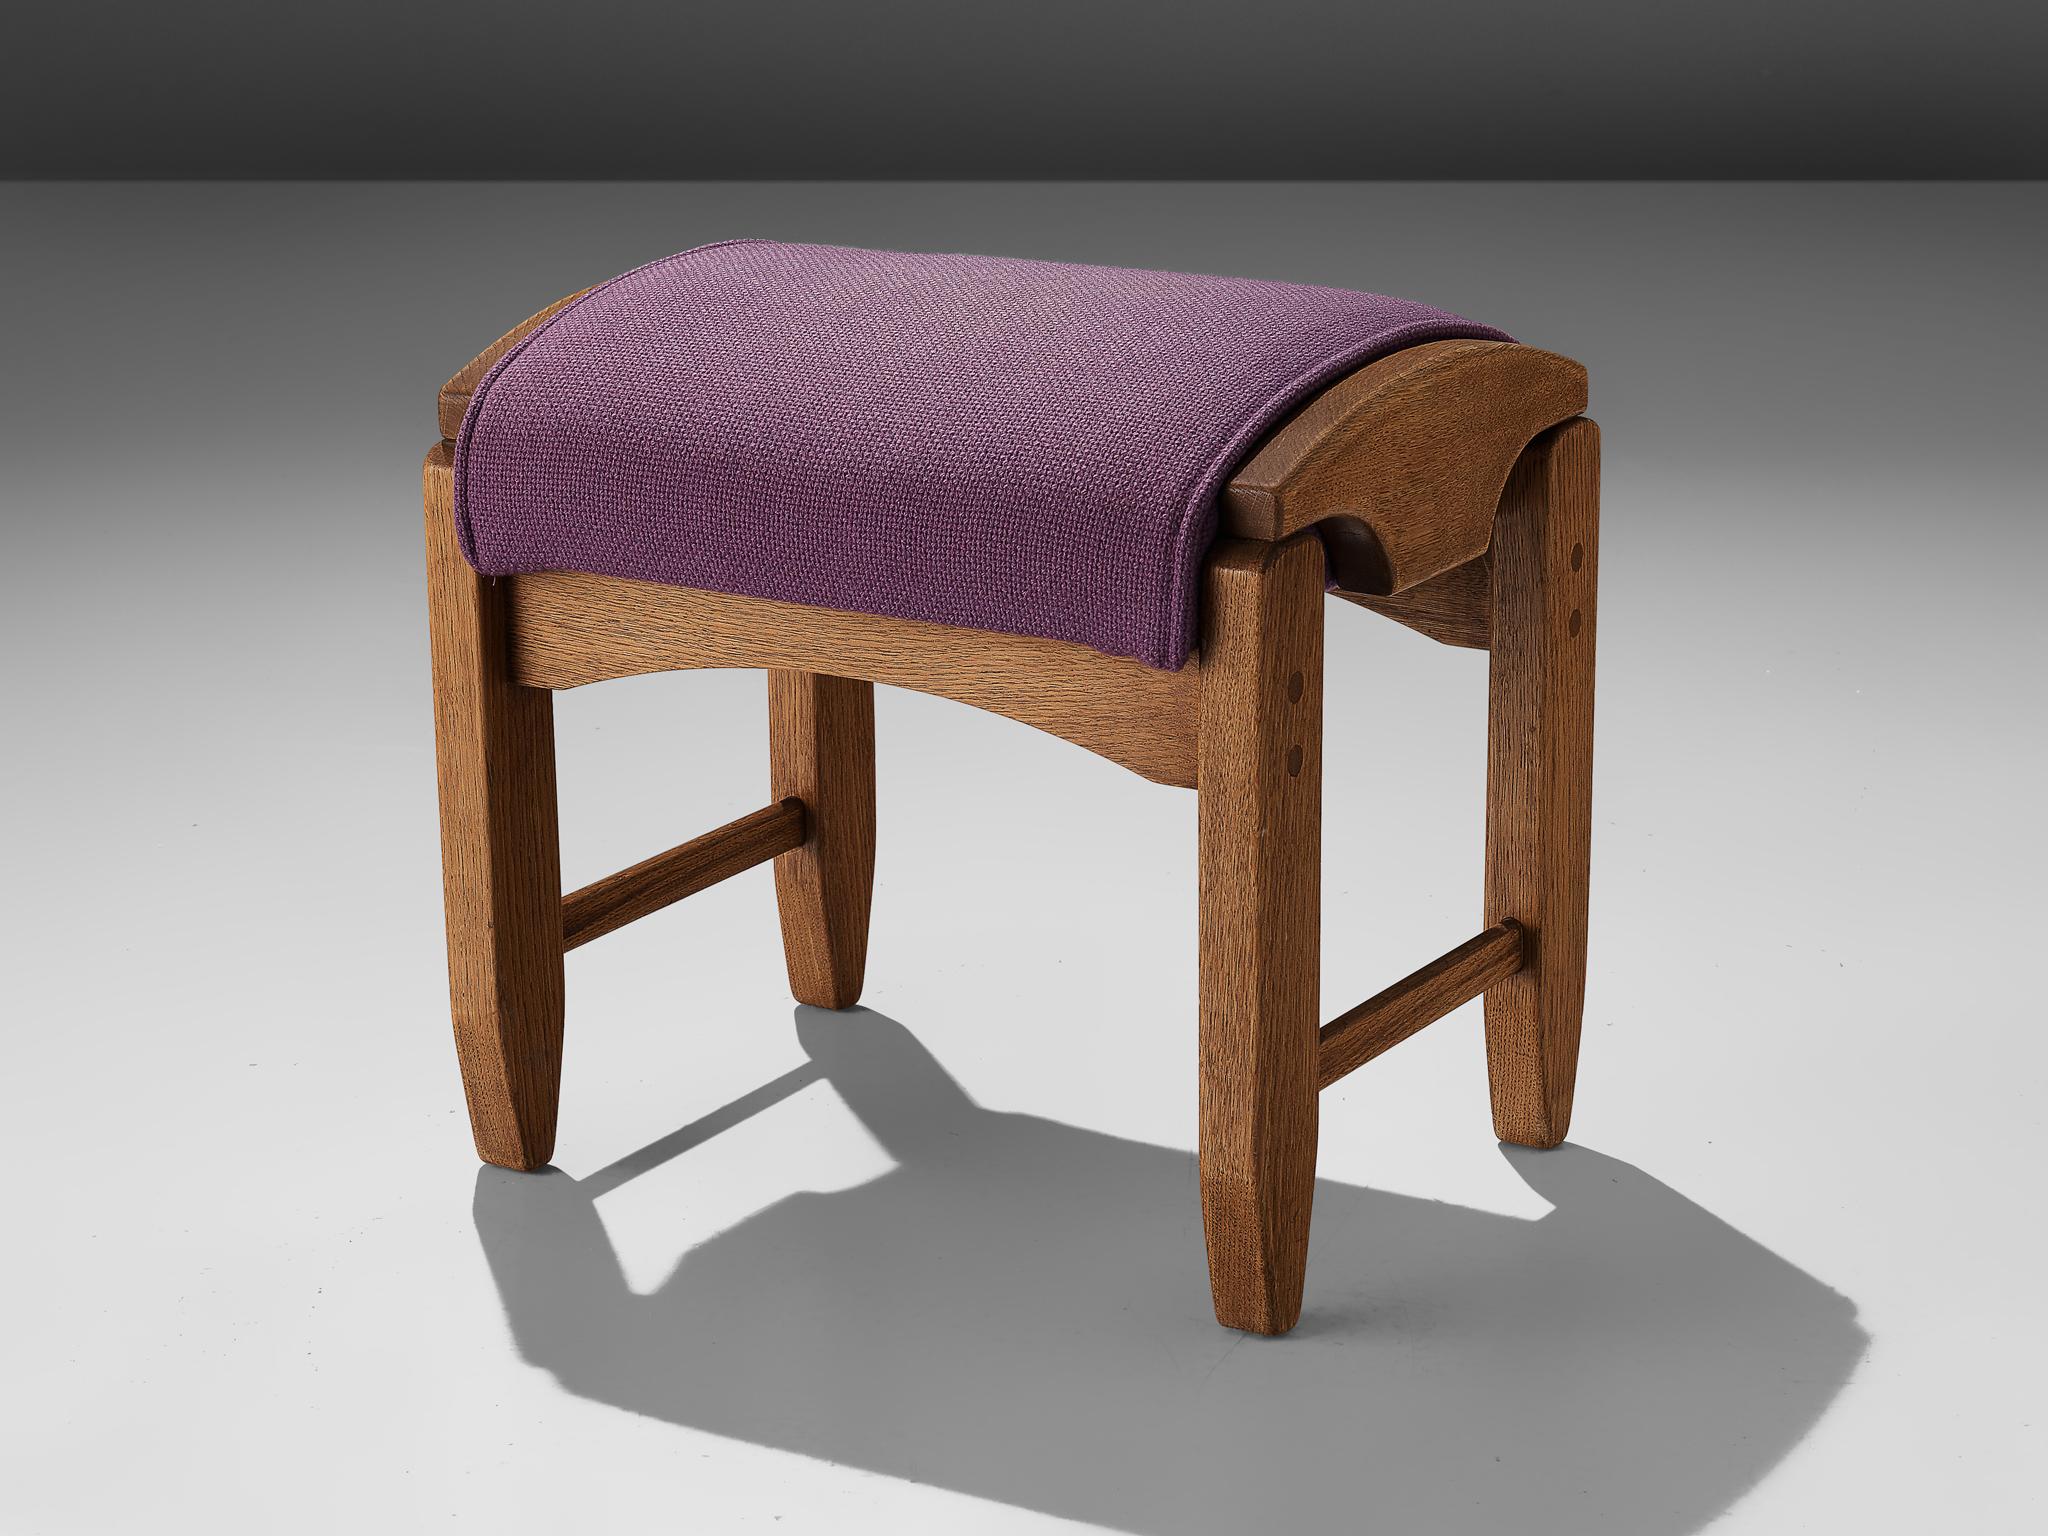 Guillerme et Chambron, stool, oak and fabric, France, 1960s. 

This solid oak wooden footstool with purple color is designed by the French designer duo Guillerme and Chambron. This ottoman has a frame in solid oak with sculptural lines and shapes.